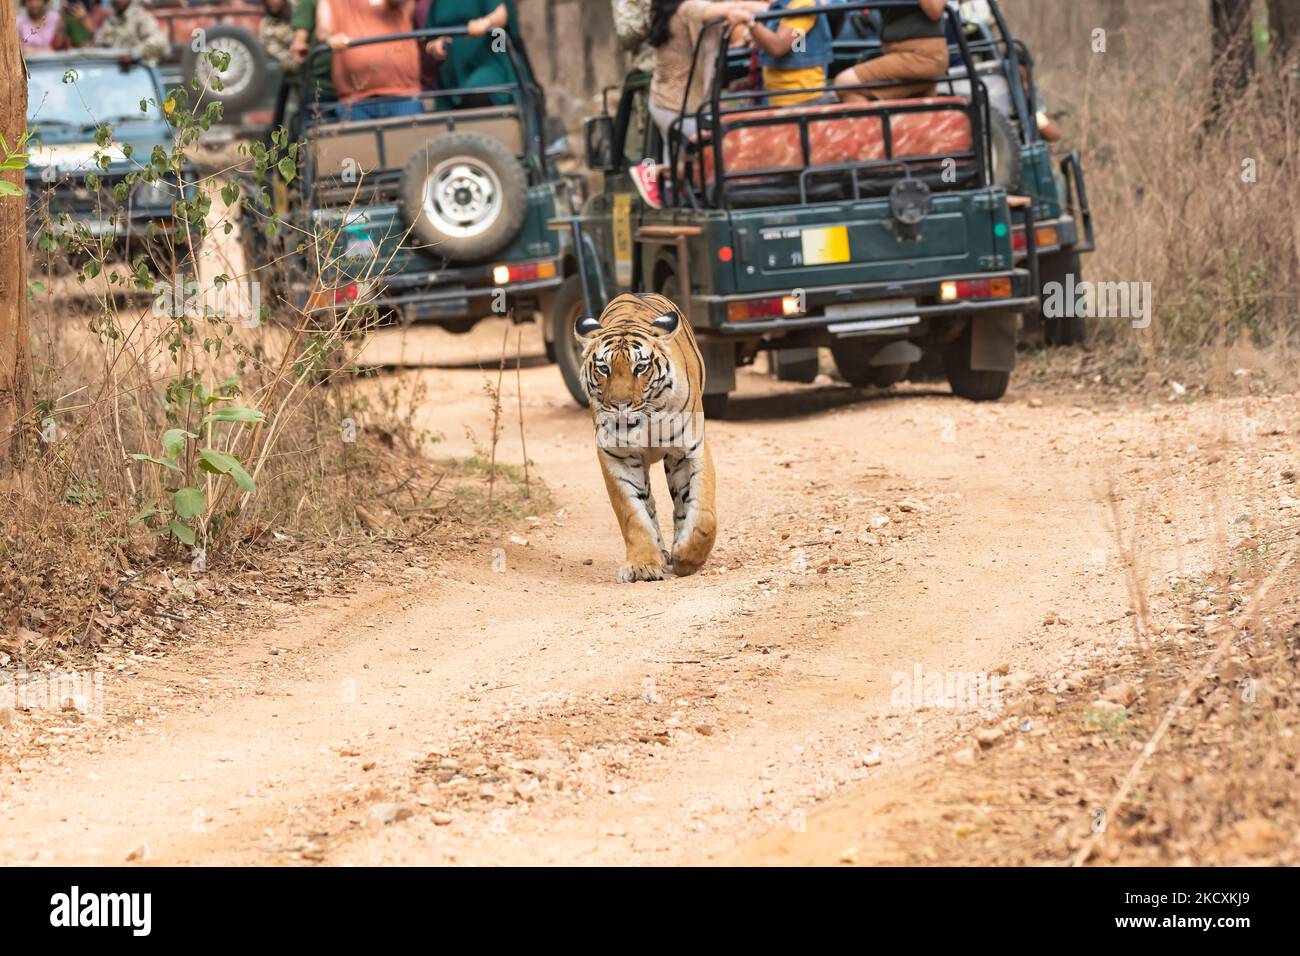 A tigress named Baras walking on a forest track with tourist vehicles behind it inside Pench National Park during a wildlife safari Stock Photo